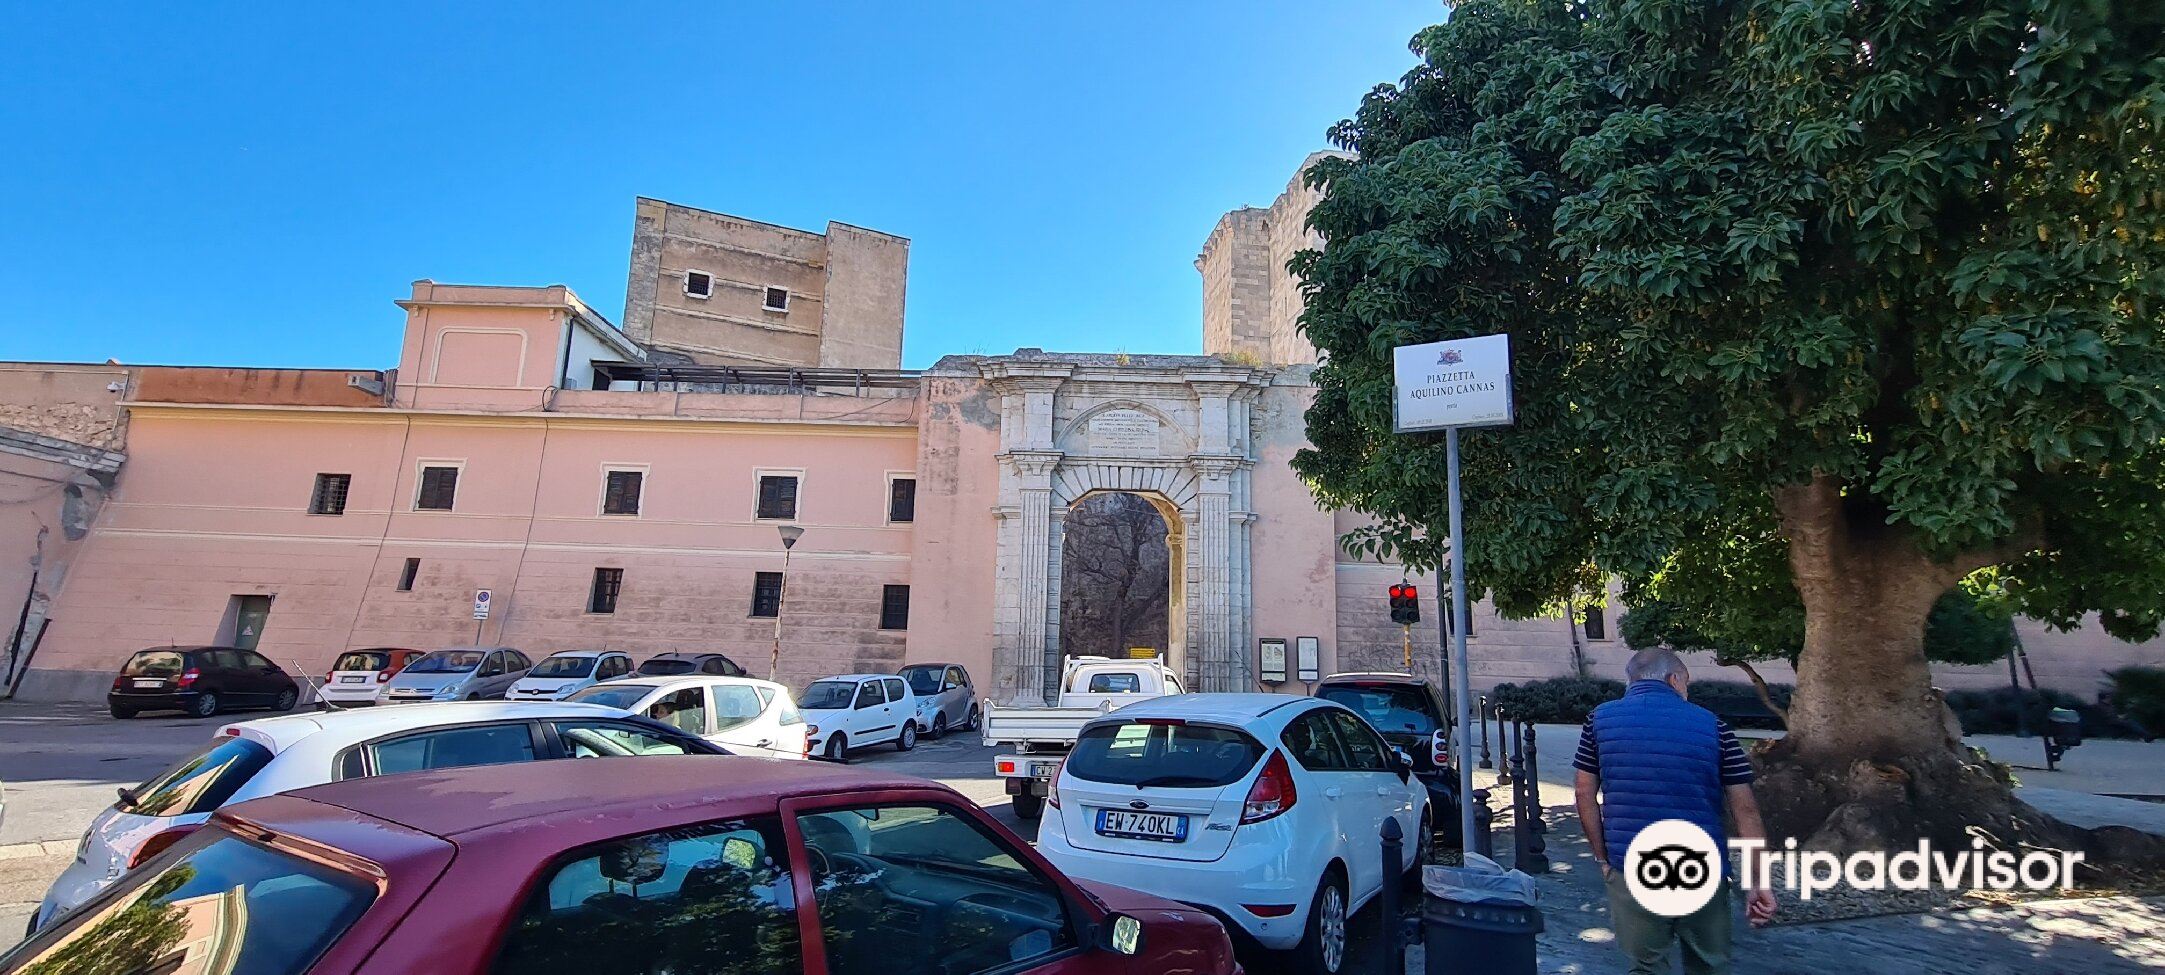 Latest travel itineraries for Porta Cristina in August (updated in 2023), Porta  Cristina reviews, Porta Cristina address and opening hours, popular  attractions, hotels, and restaurants near Porta Cristina - Trip.com